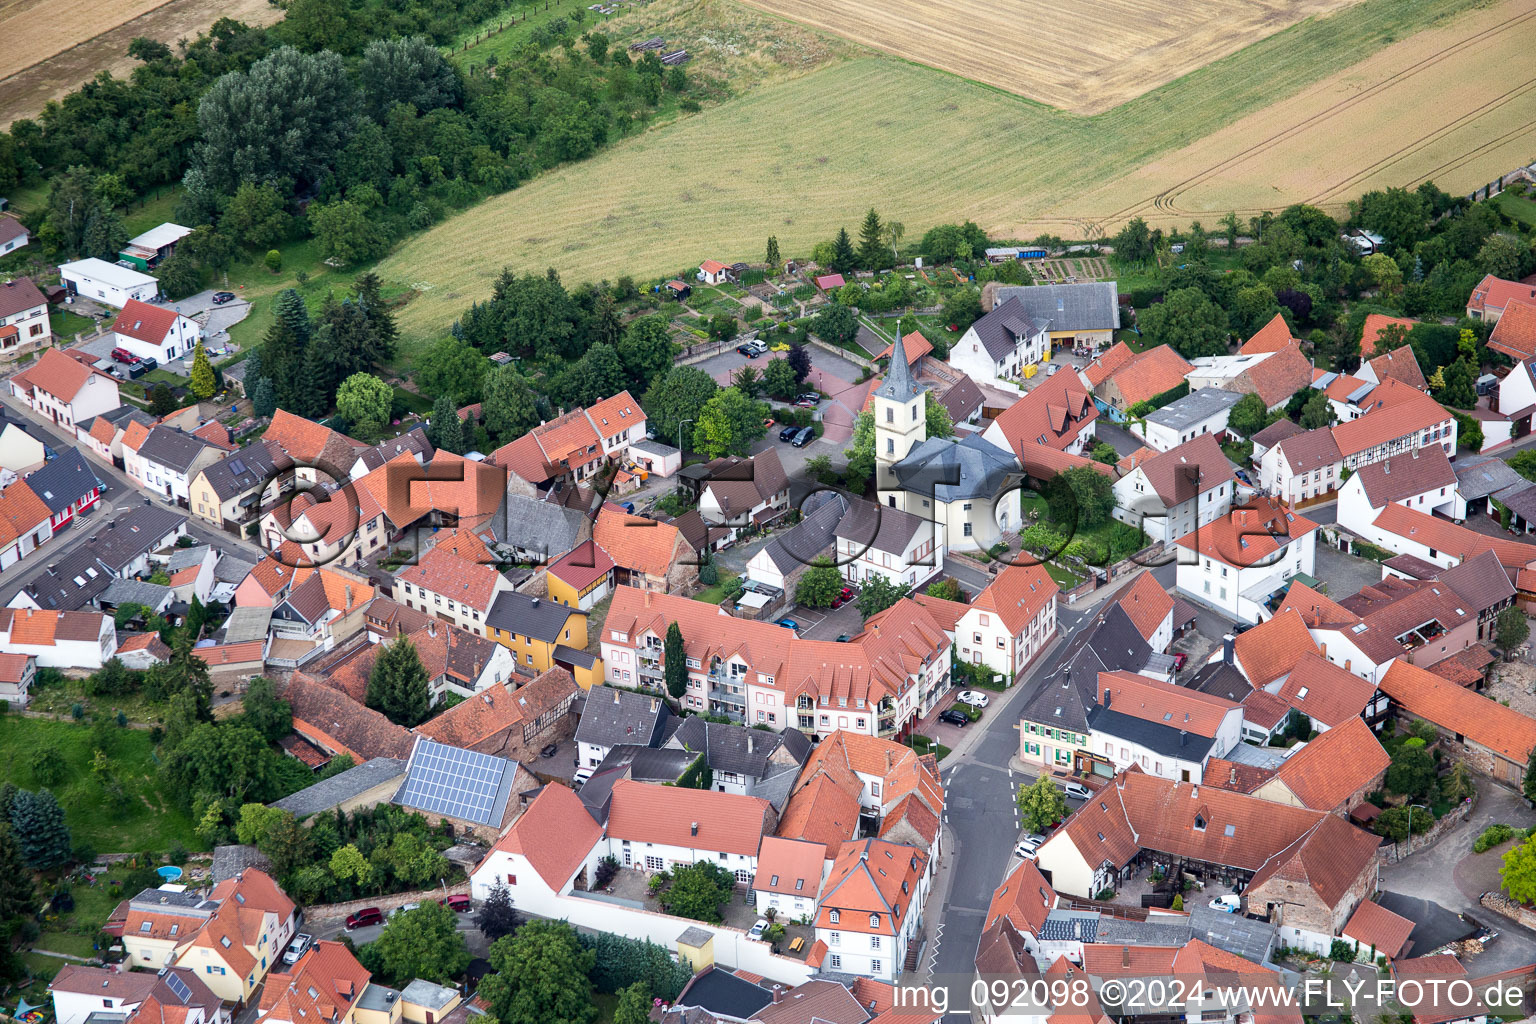 Aerial view of Village - view on the edge of agricultural fields and farmland in Kerzenheim in the state Rhineland-Palatinate, Germany